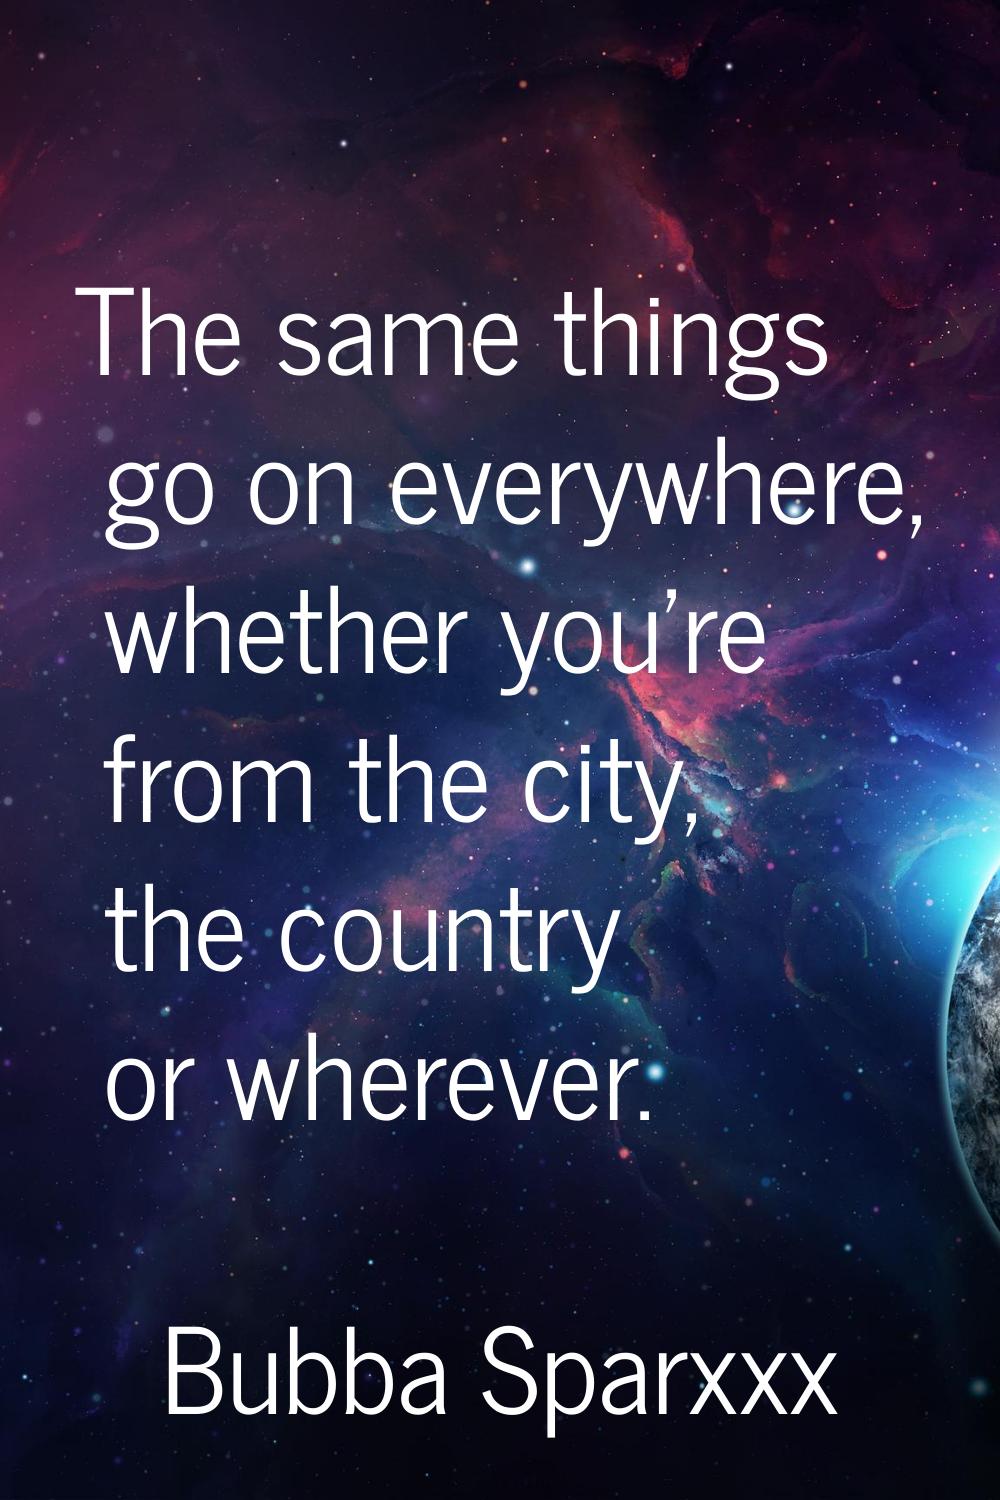 The same things go on everywhere, whether you're from the city, the country or wherever.